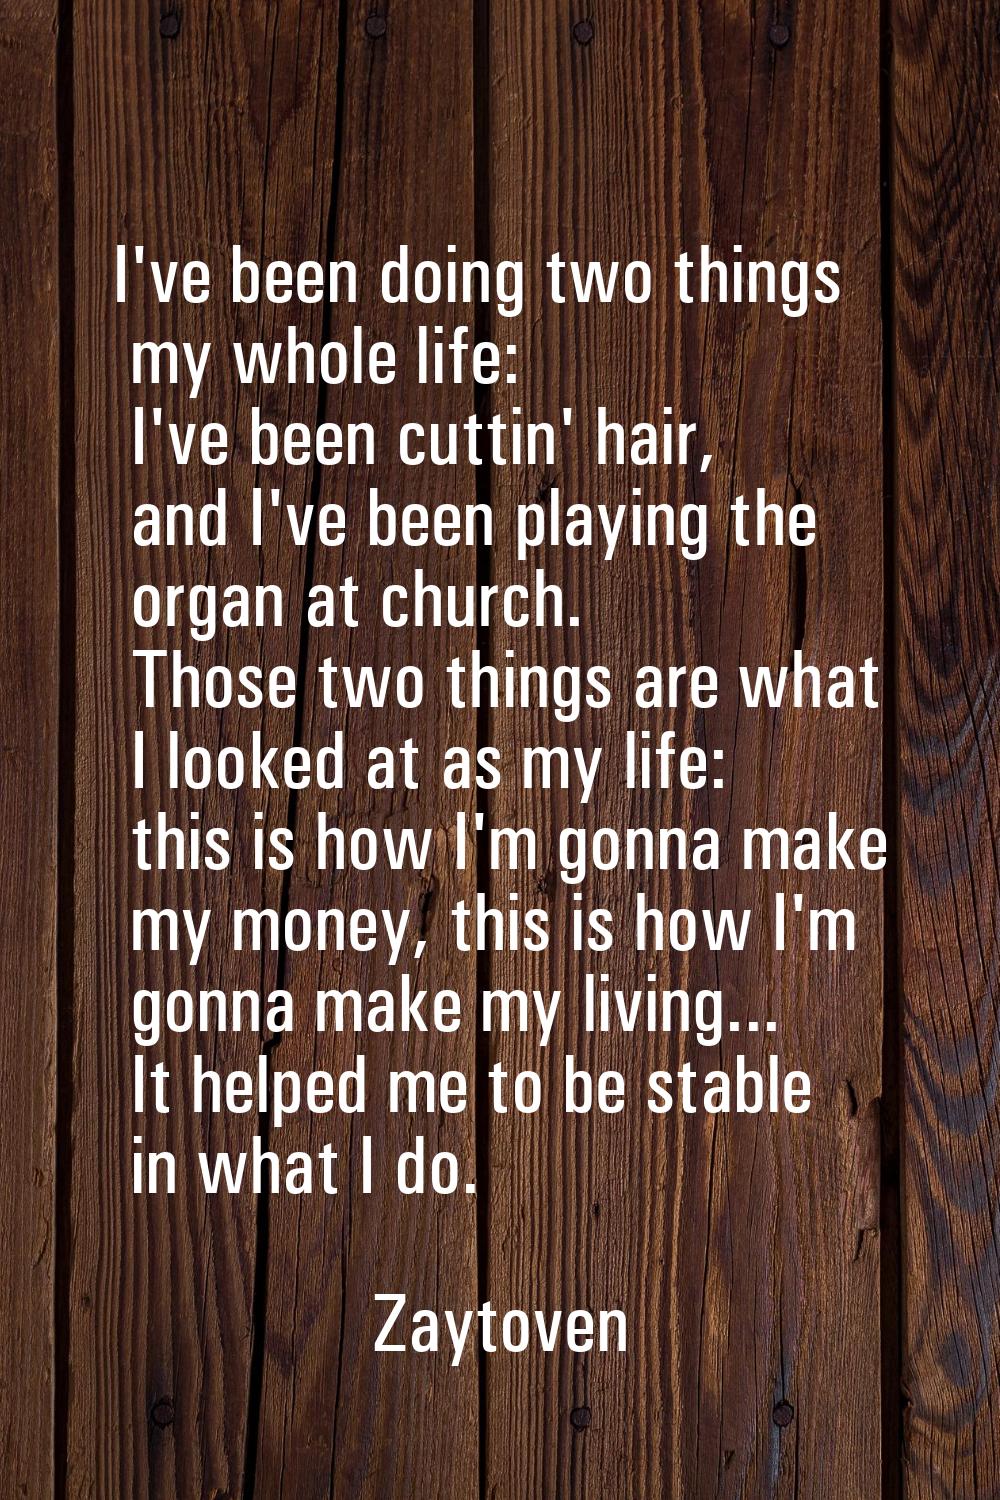 I've been doing two things my whole life: I've been cuttin' hair, and I've been playing the organ a